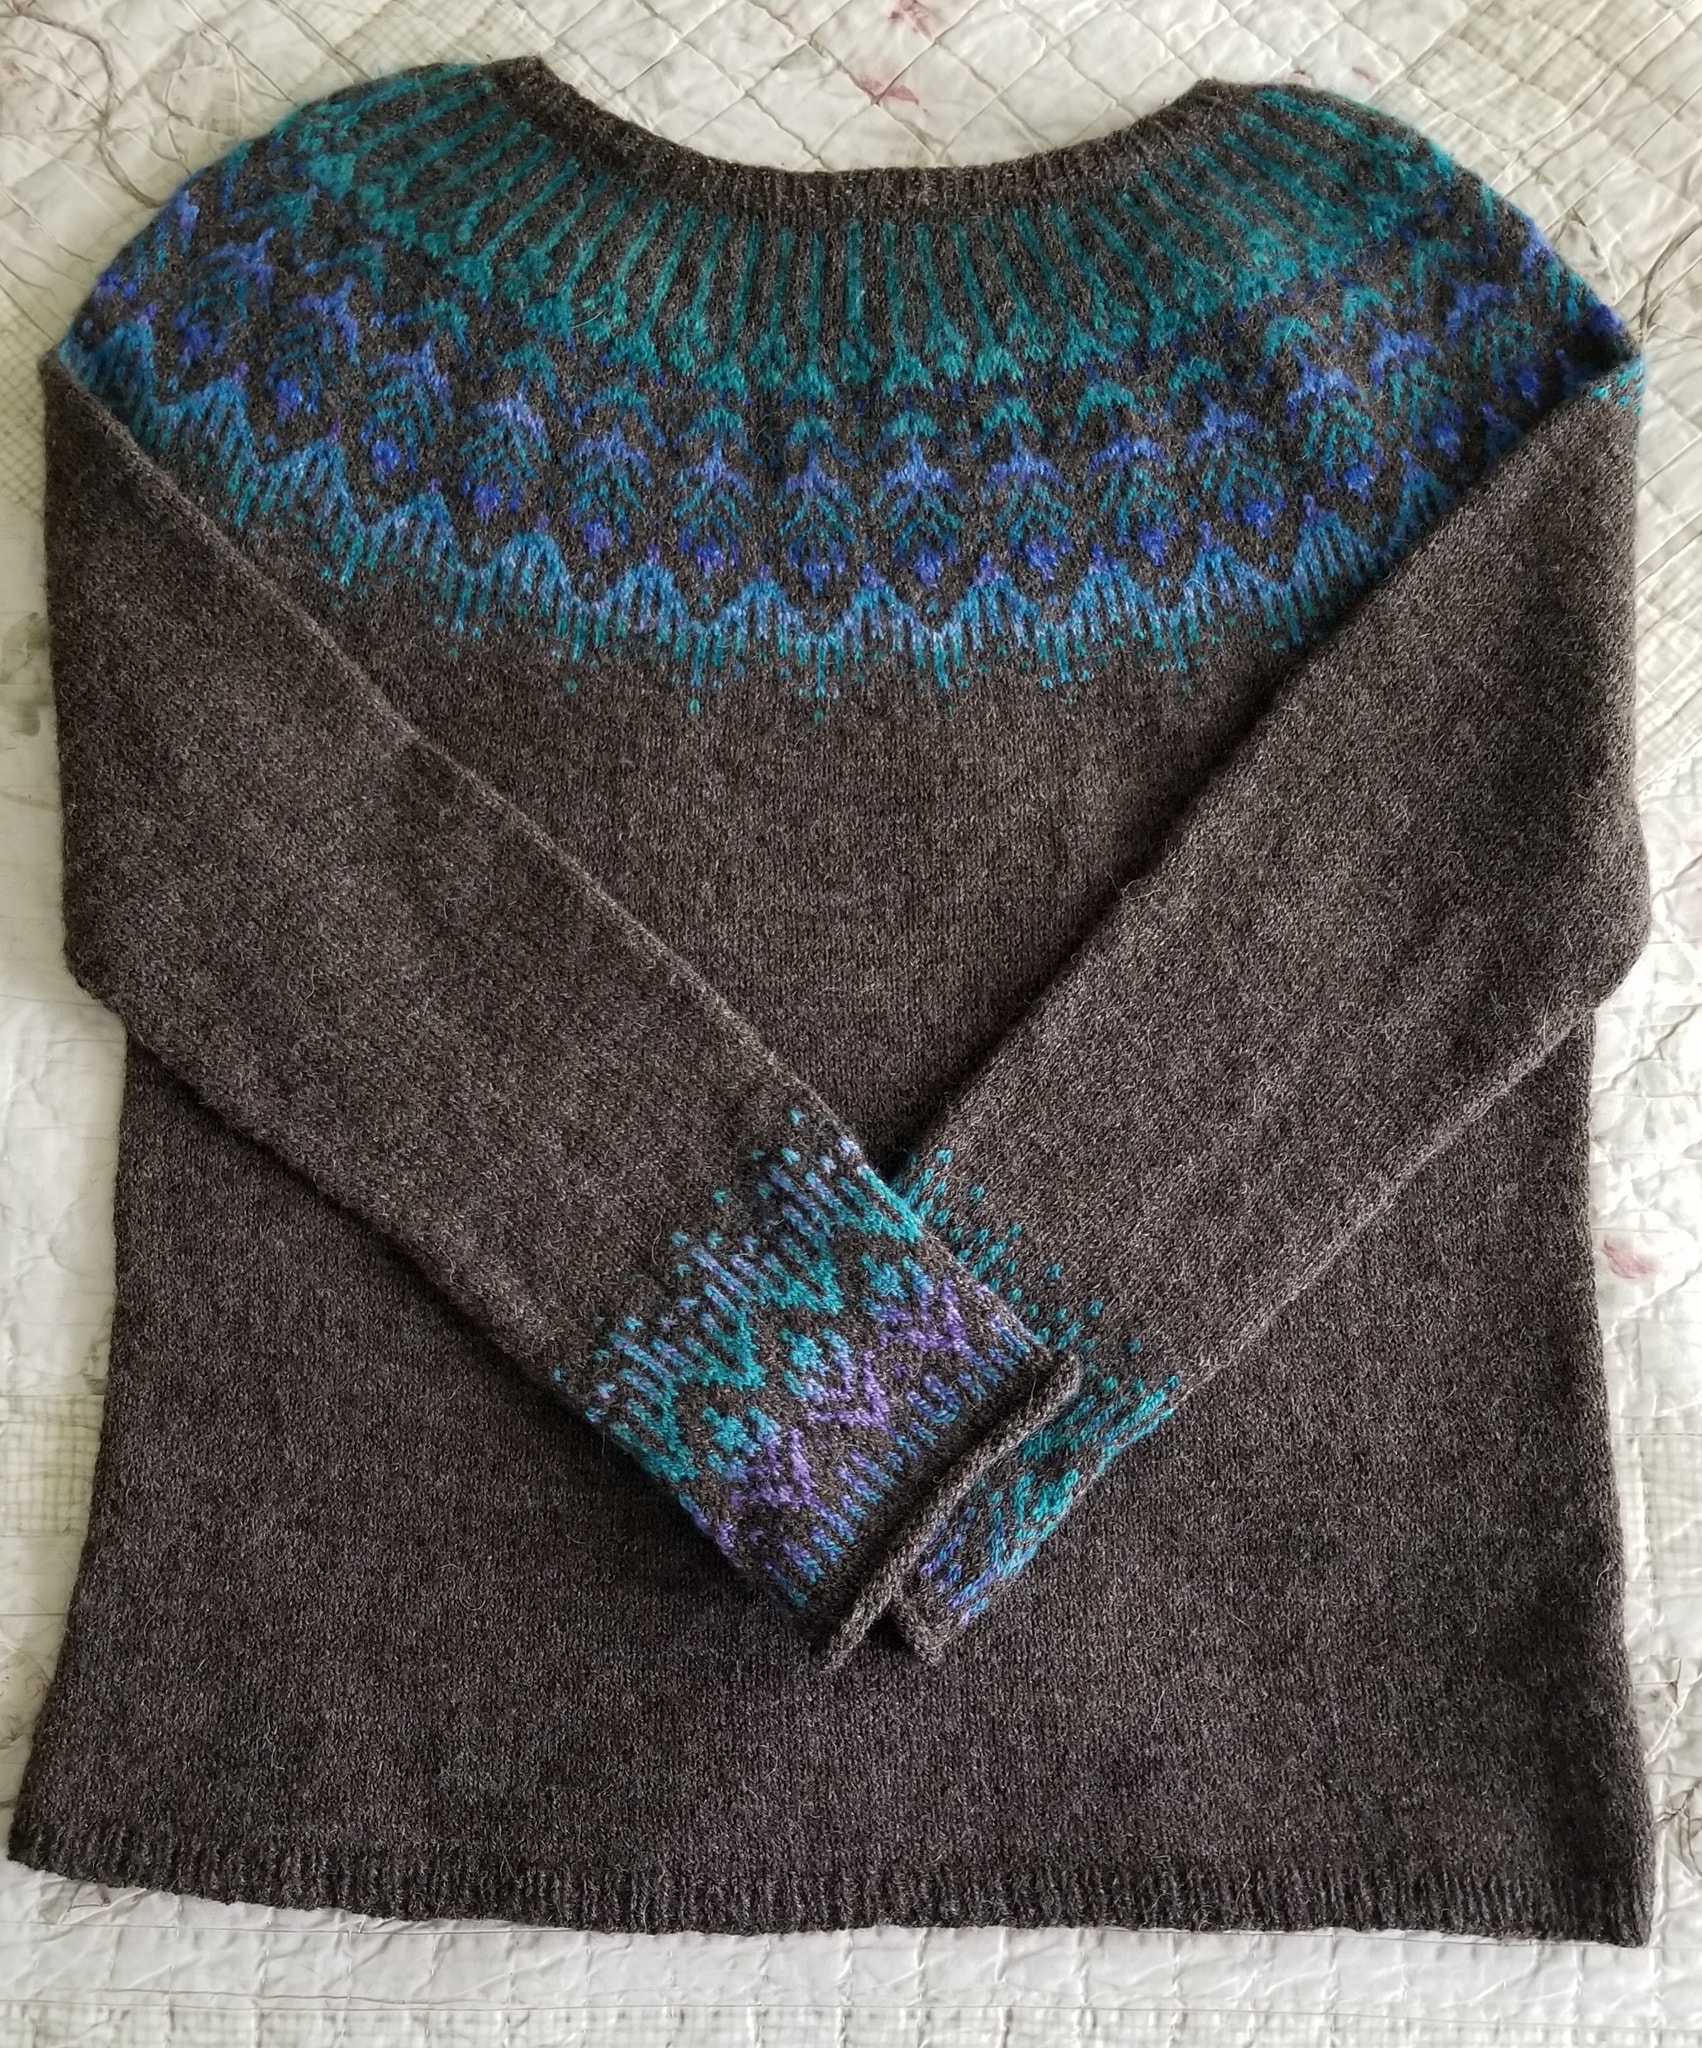 Sonrae Sweater and Stash Busting – Spindles In the Wild